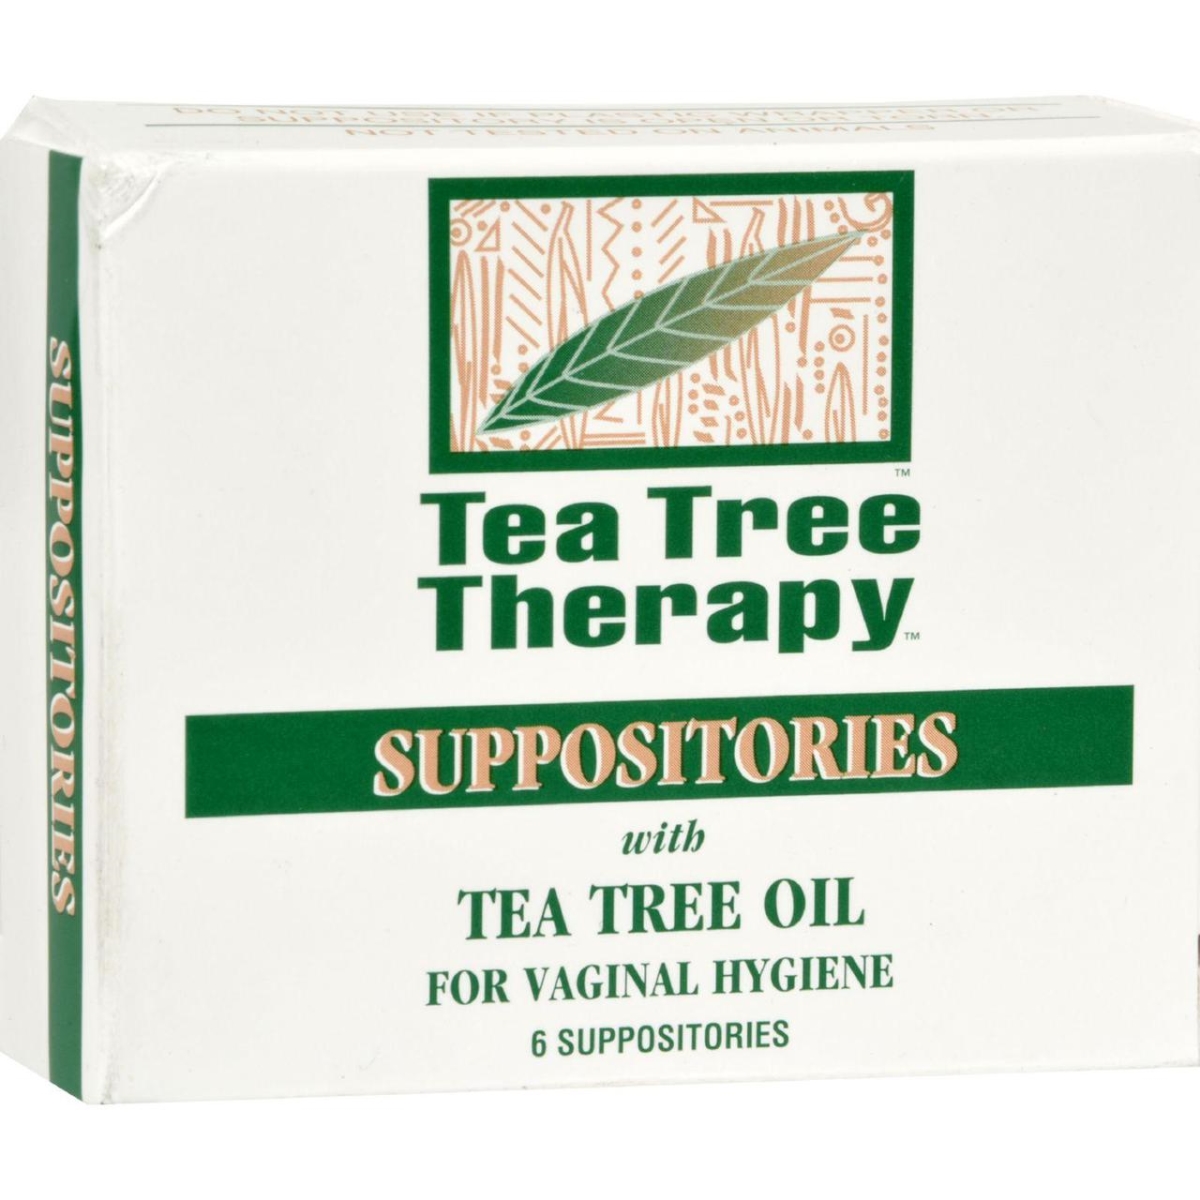 Hg0587766 Vaginal Suppositories With Tea Tree Oil - 6 Suppositories